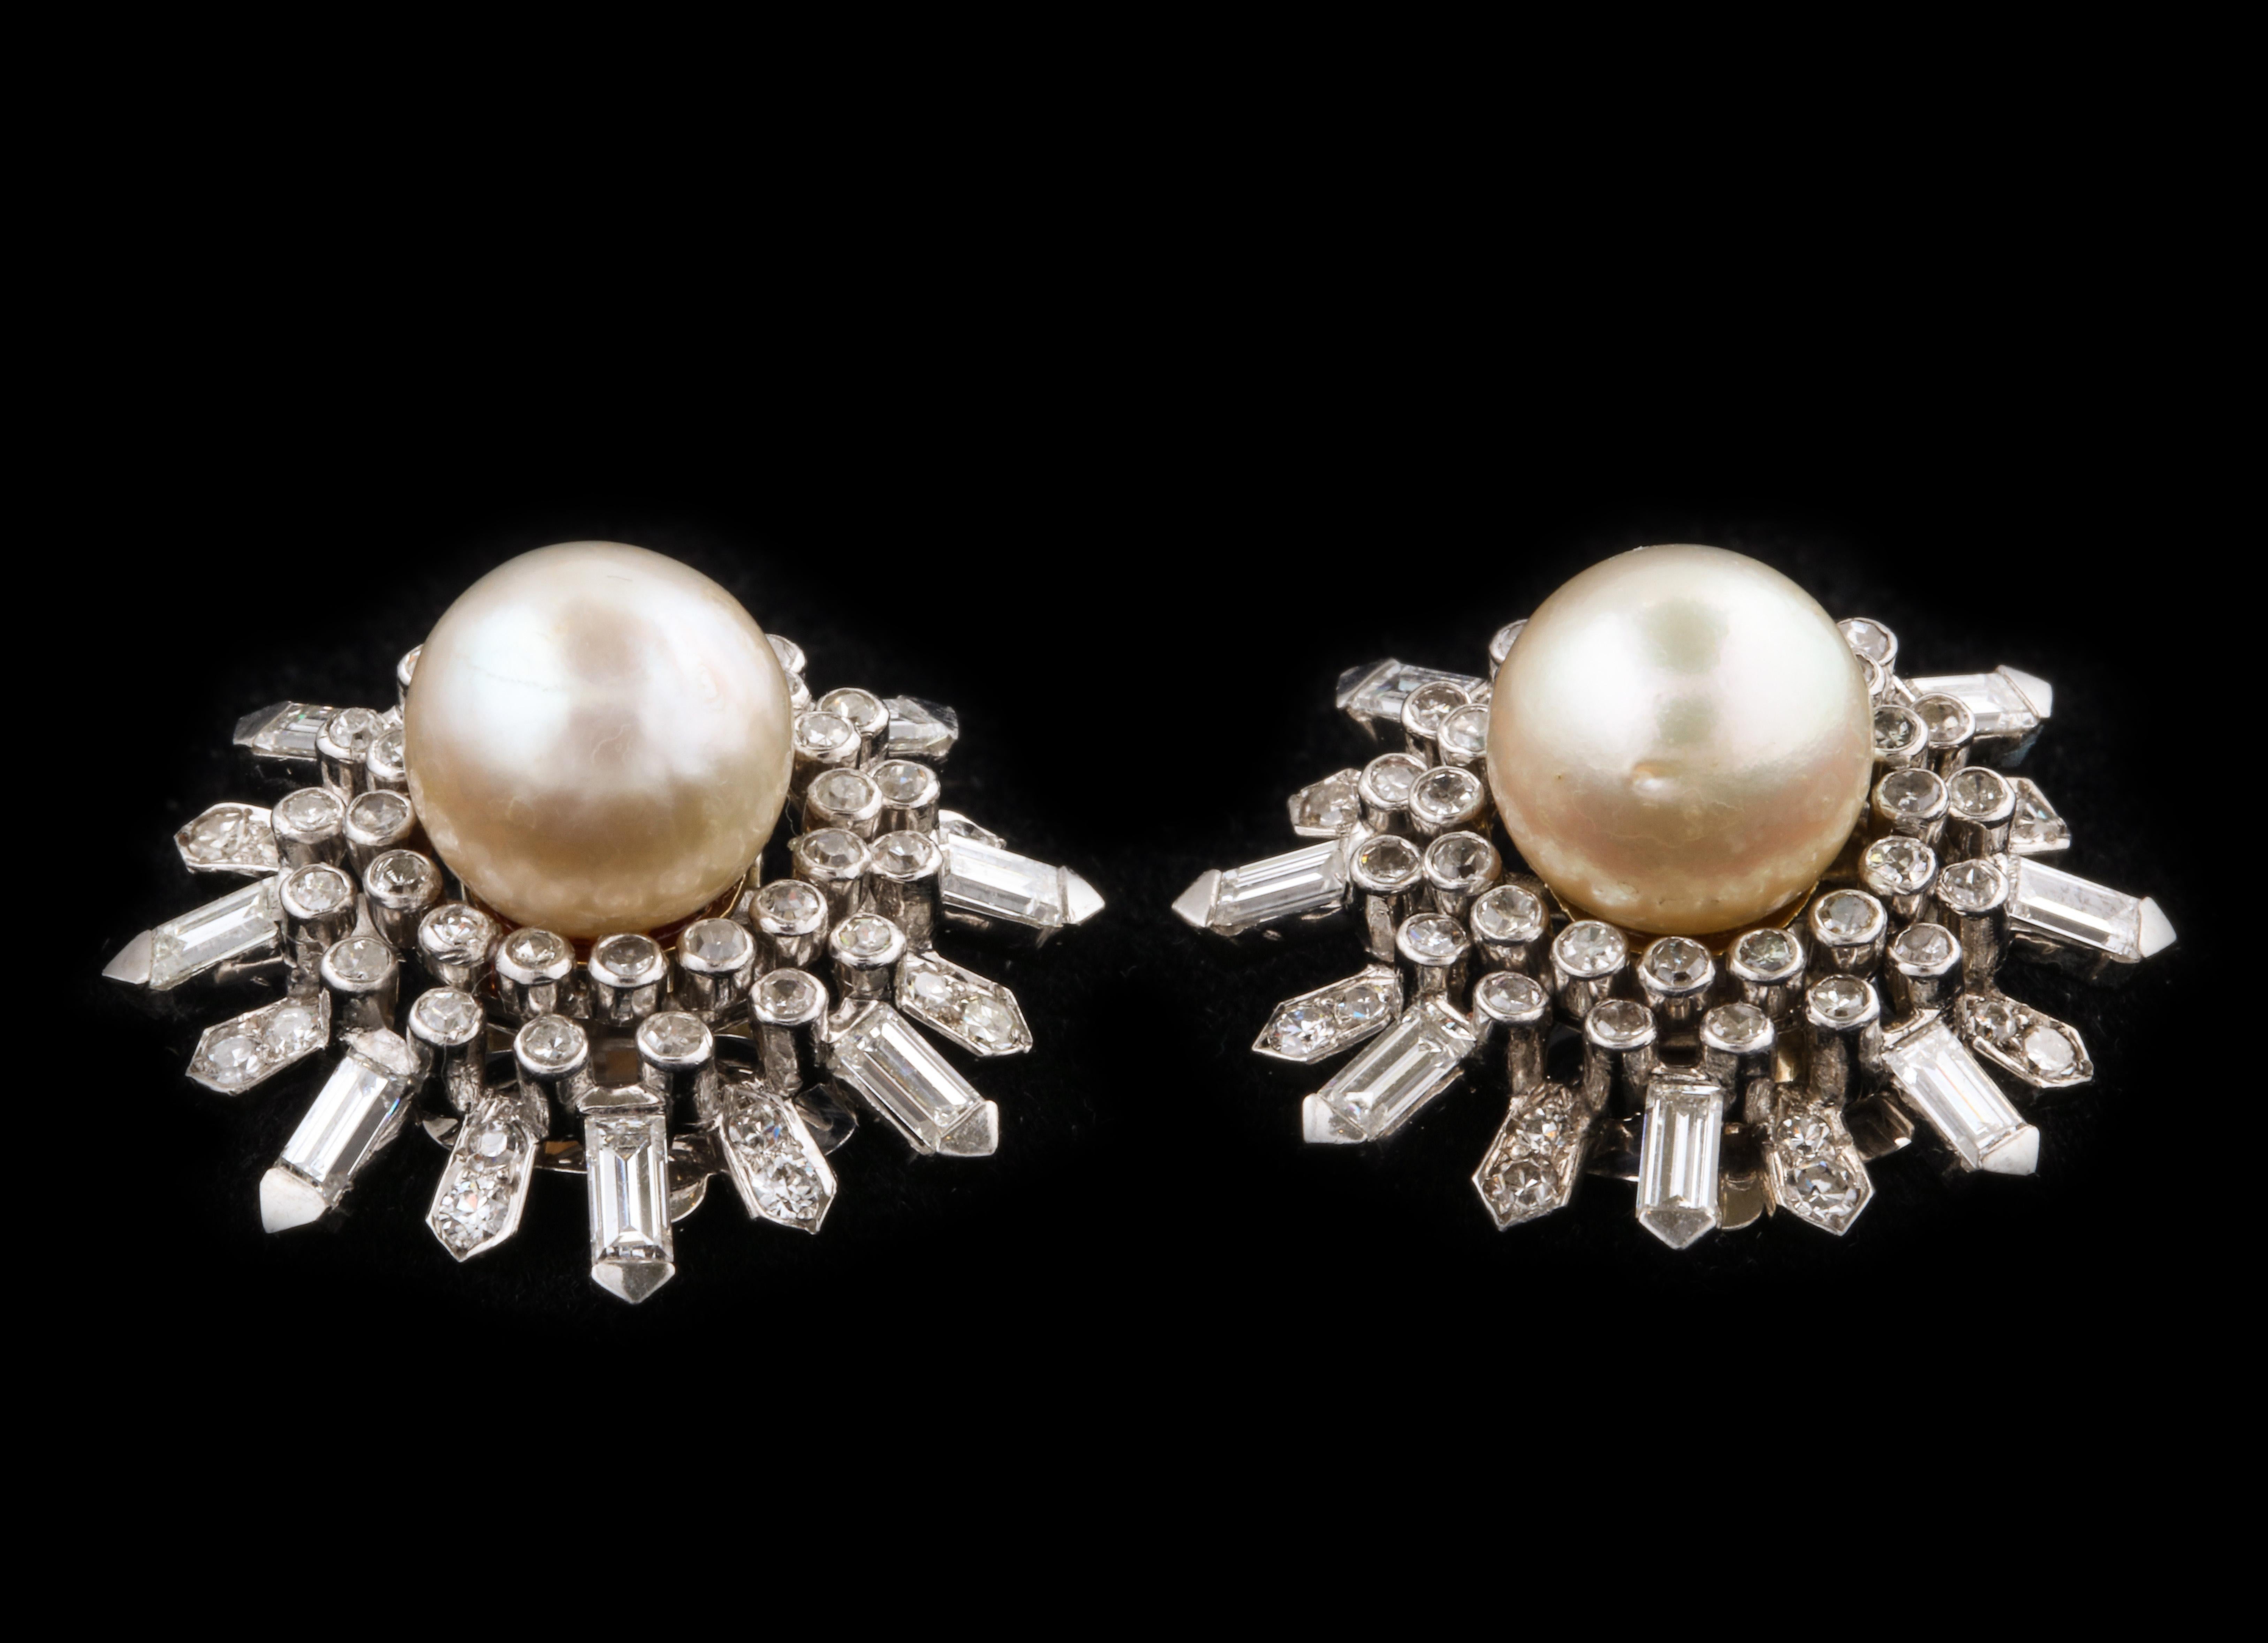 Van Cleef & Arpels Pearl Earrings

Extremely chic fancy cut diamond and pearl earrings made by Van Cleef and Arpels

Made circa 1960

Measure Approximately: 1